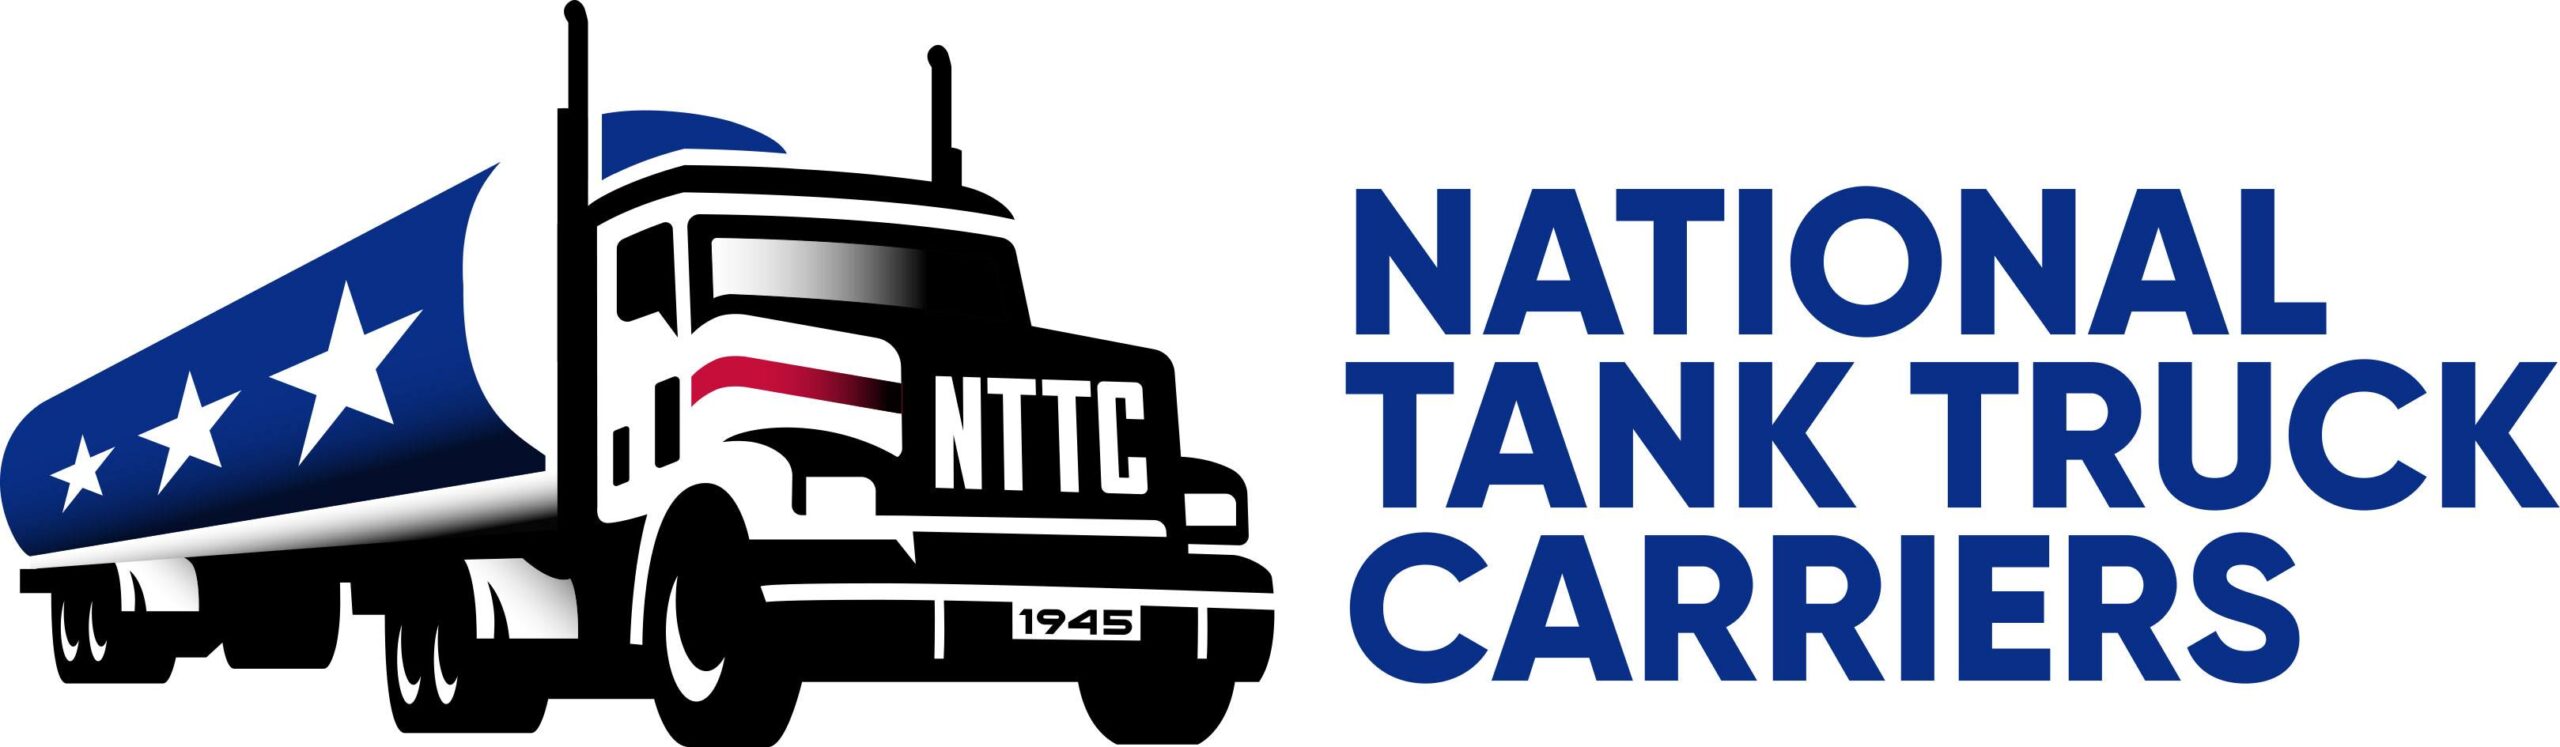 National Tank Truck Carriers